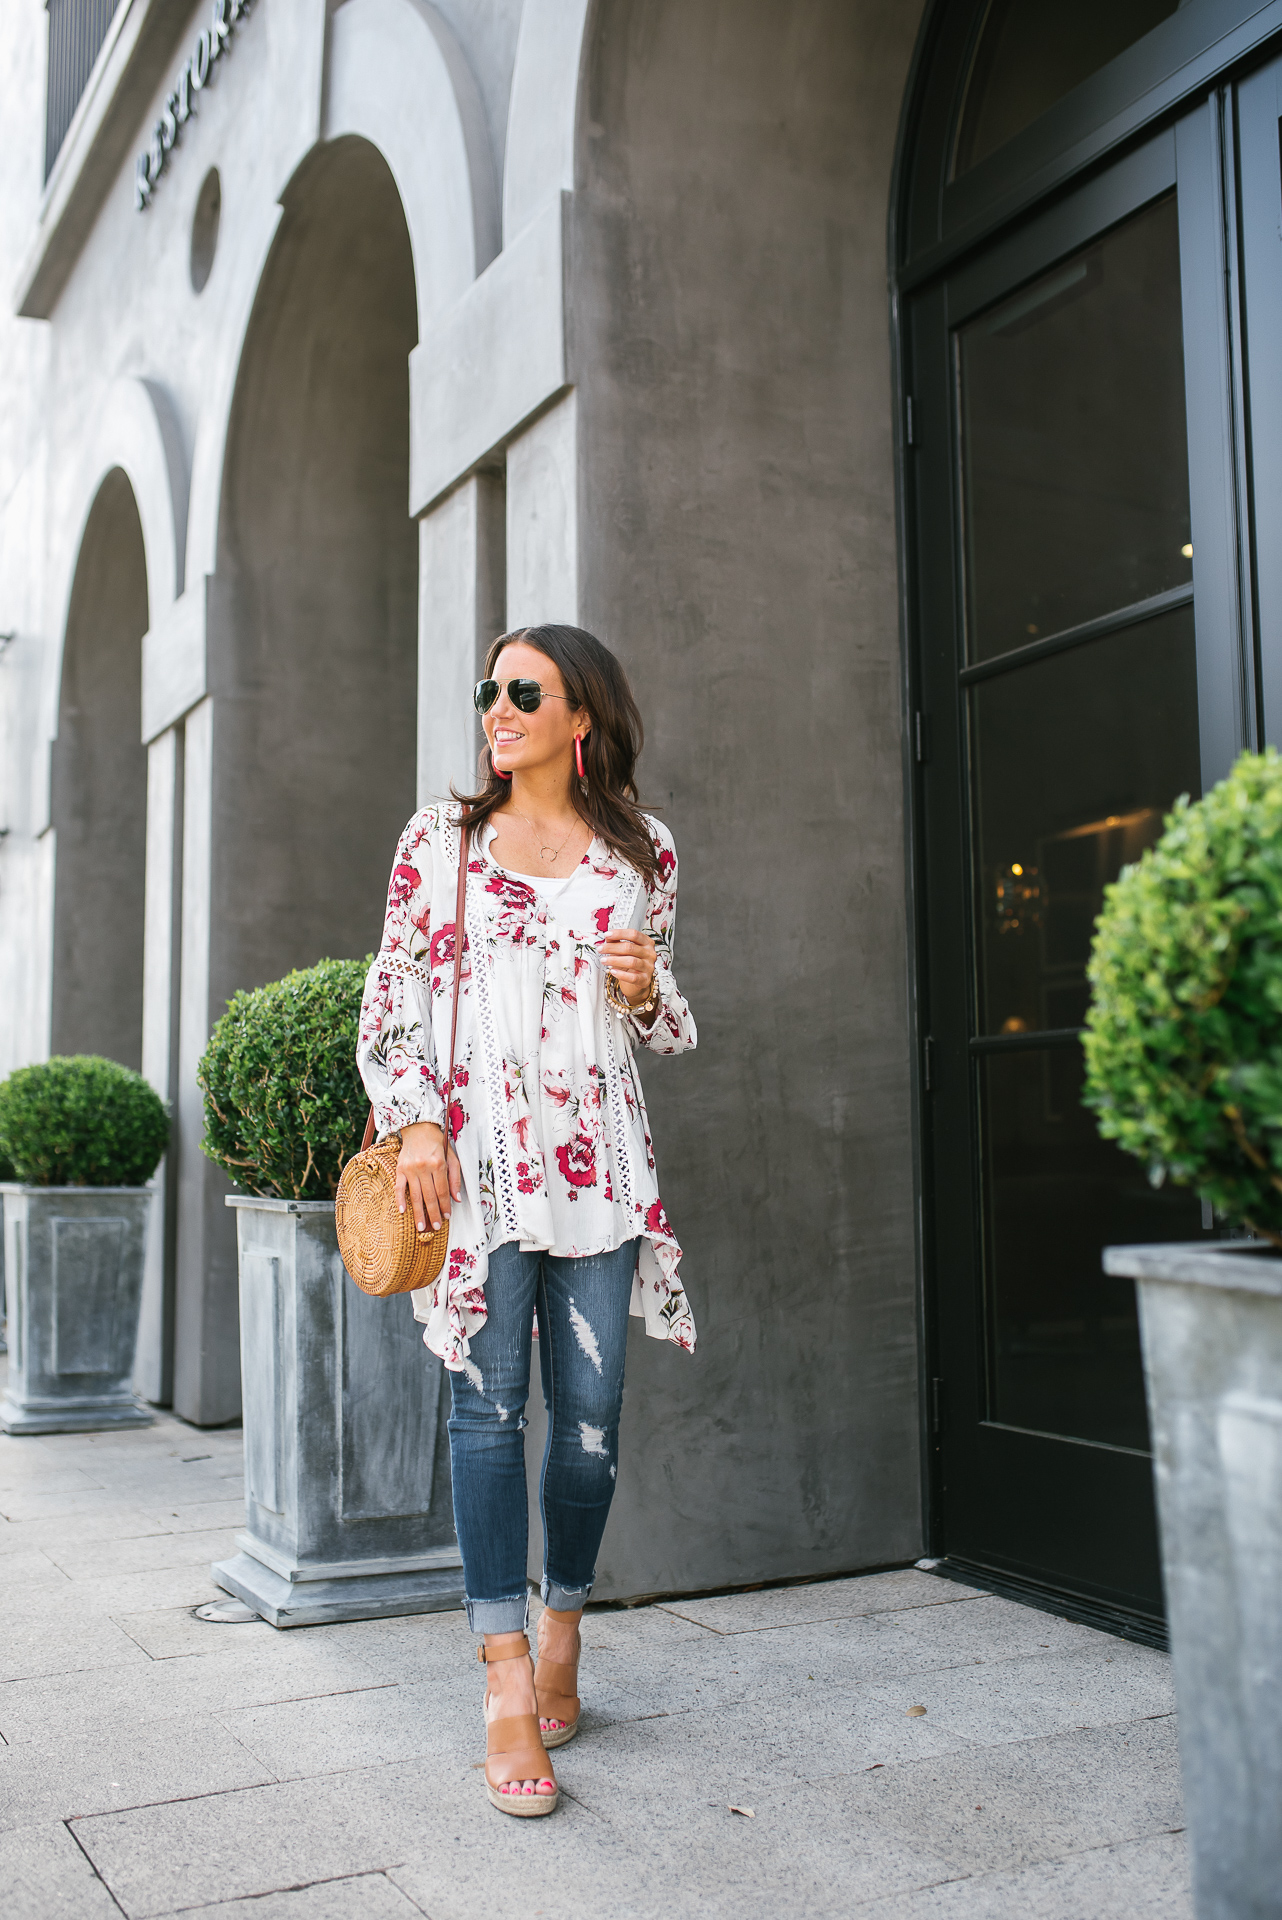 http://ladyinviolet.com/wp-content/uploads/2019/05/a-spring-outfit-white-floral-tunic-brown-wedge-sandals.jpg